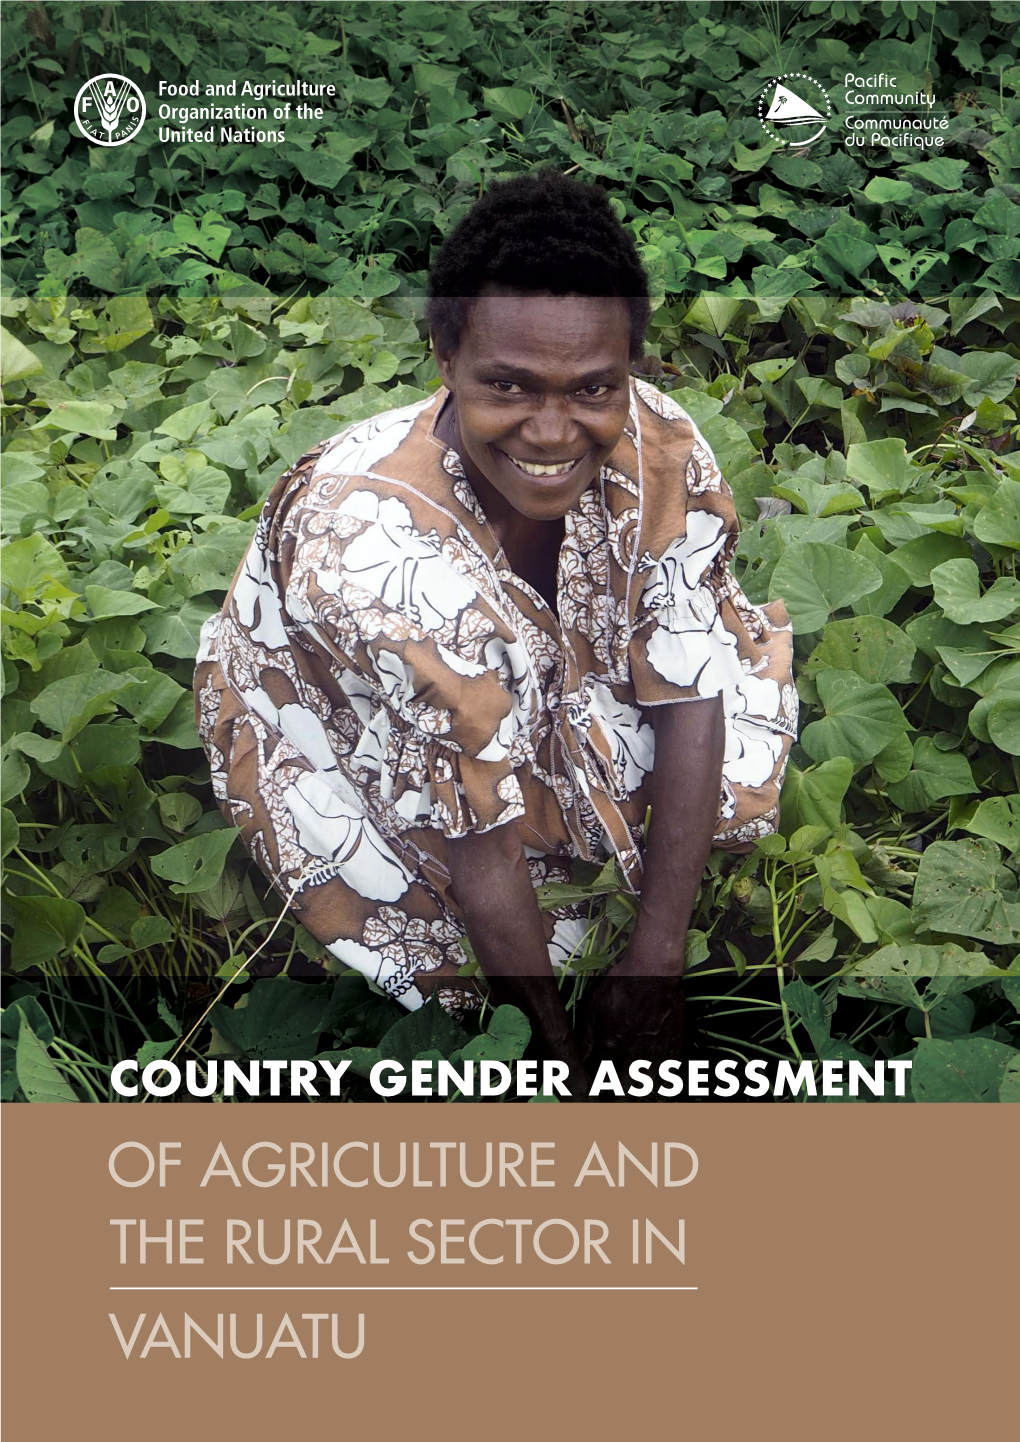 Country Gender Assessment of Agriculture and the Rural Sector in Vanuatu